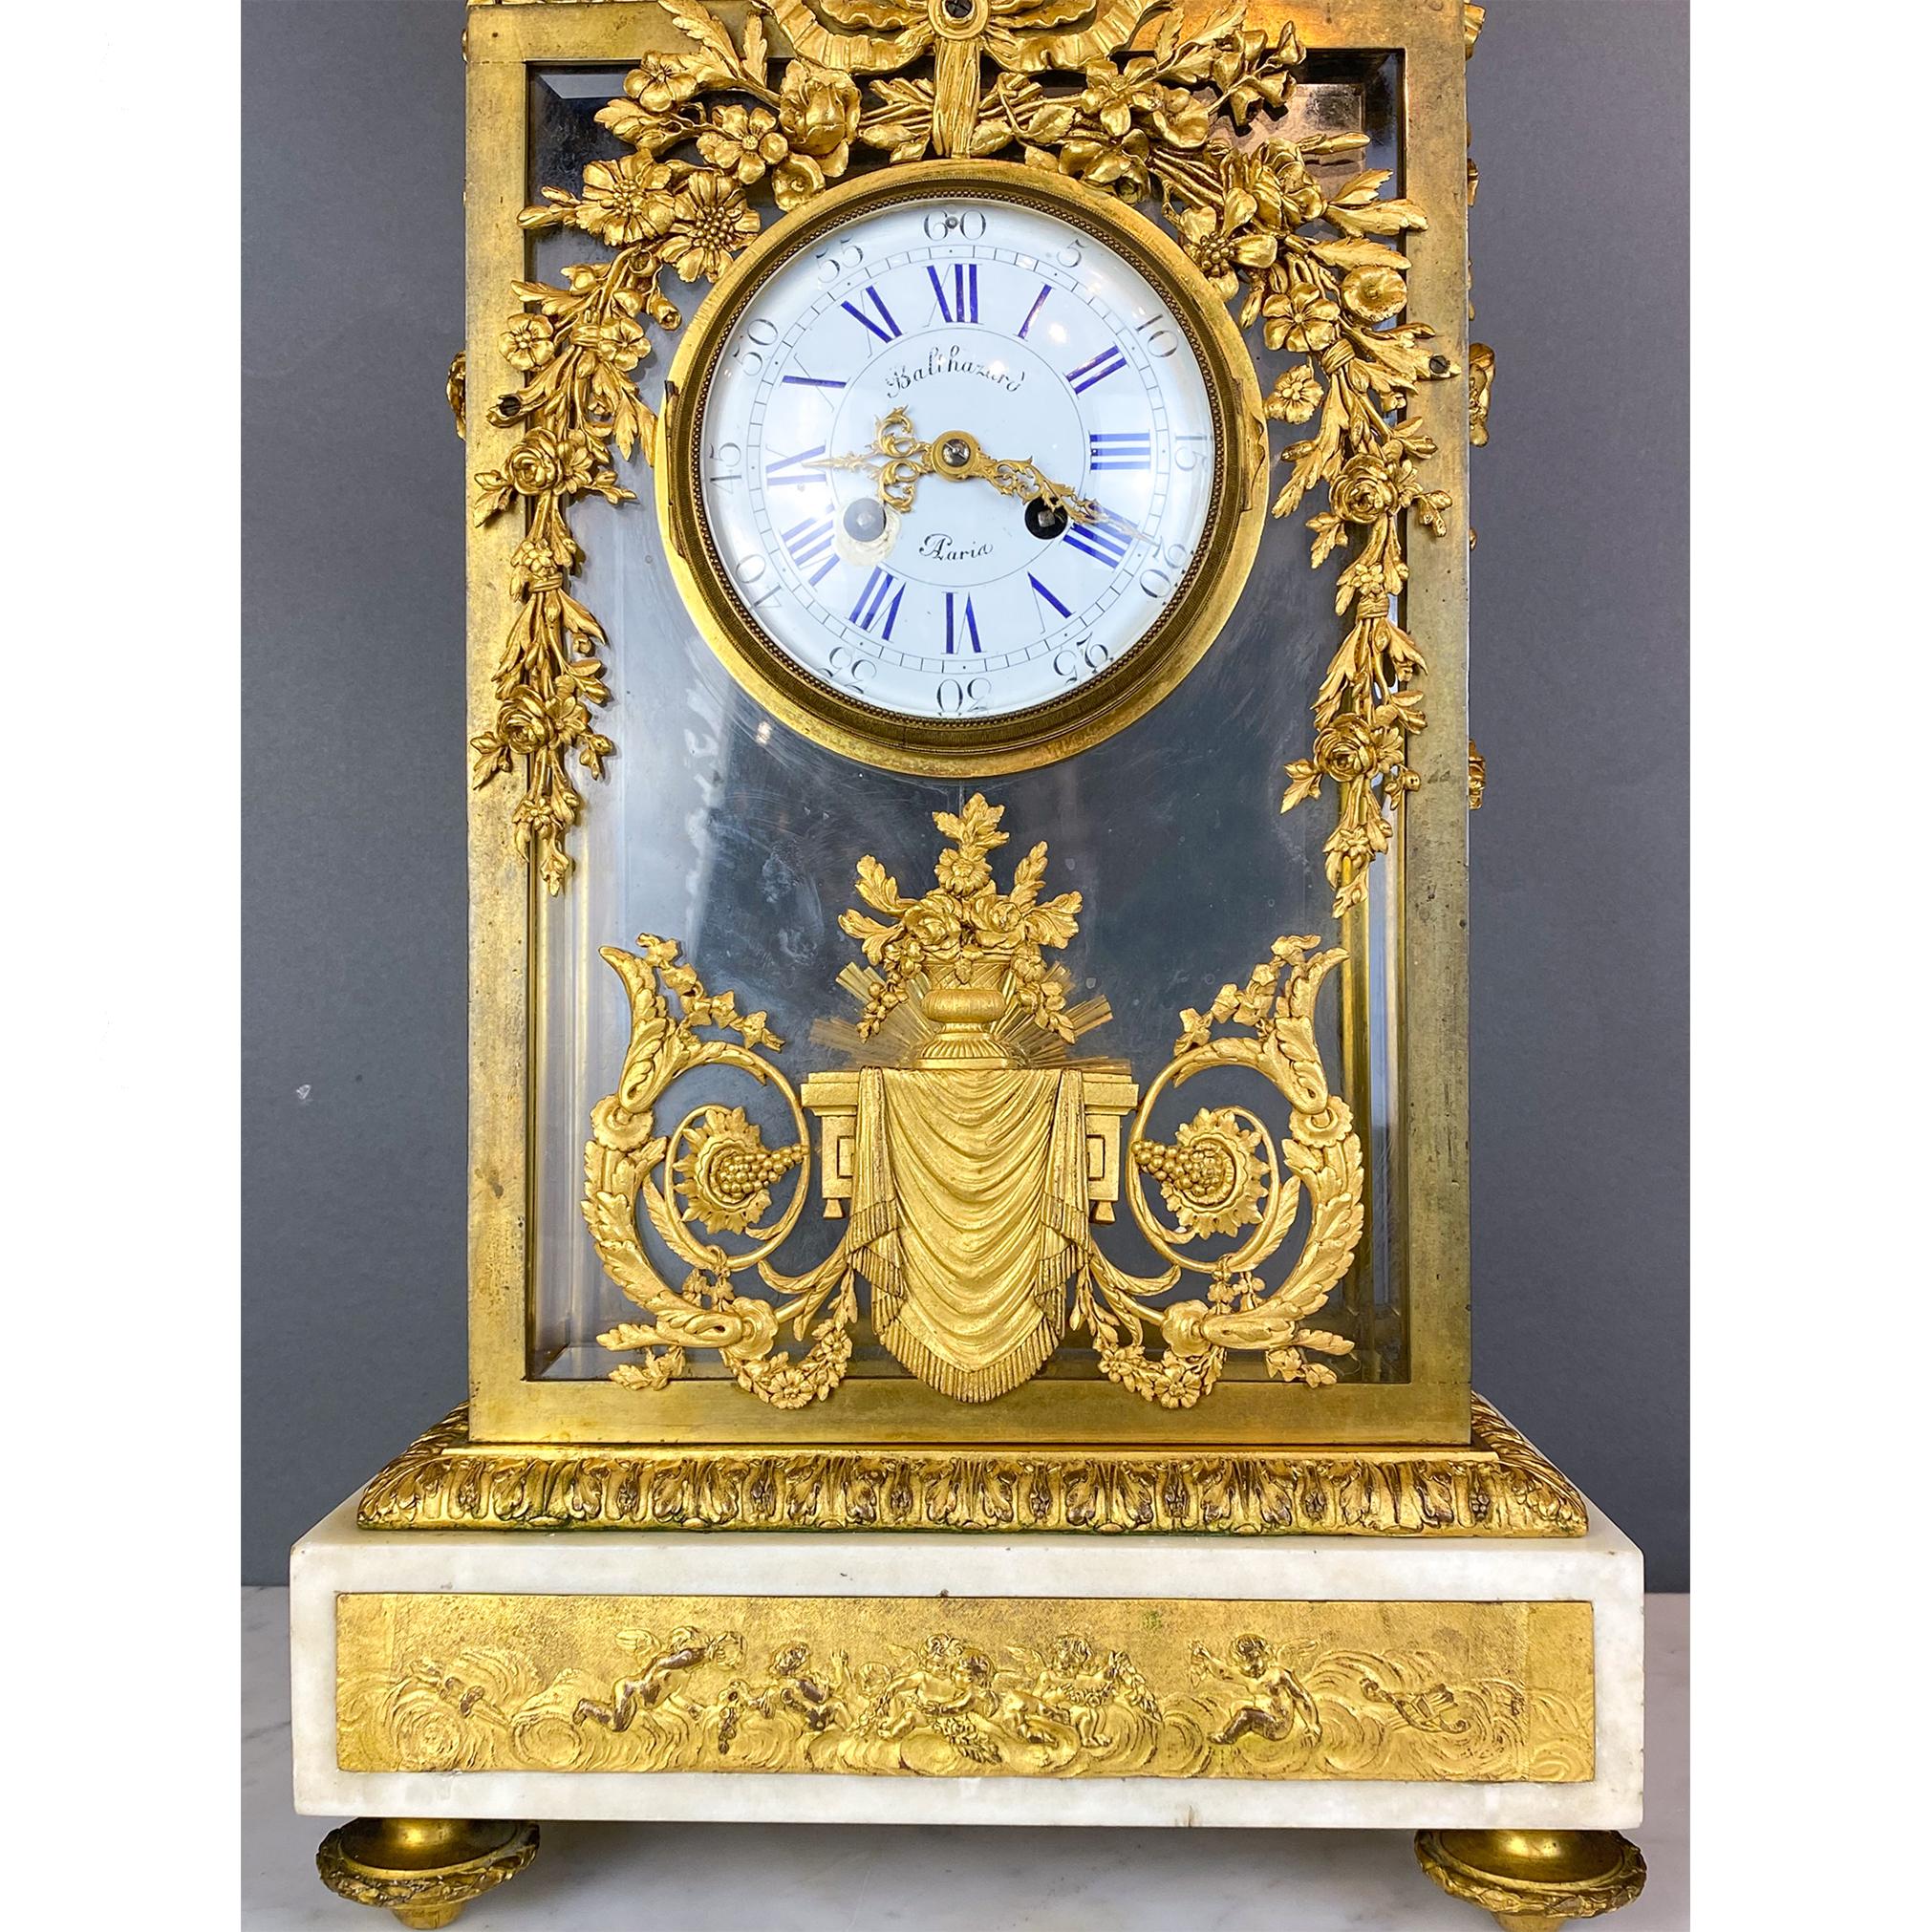 Gilt bronze and glass clock. Rectangular clear glass body showcases an internal sun shaped pendulum. Adorned with foliage, floral and drapery details, the clock is crowned by an urn with an acorn top. The rectangular marble base has a gilt bronze